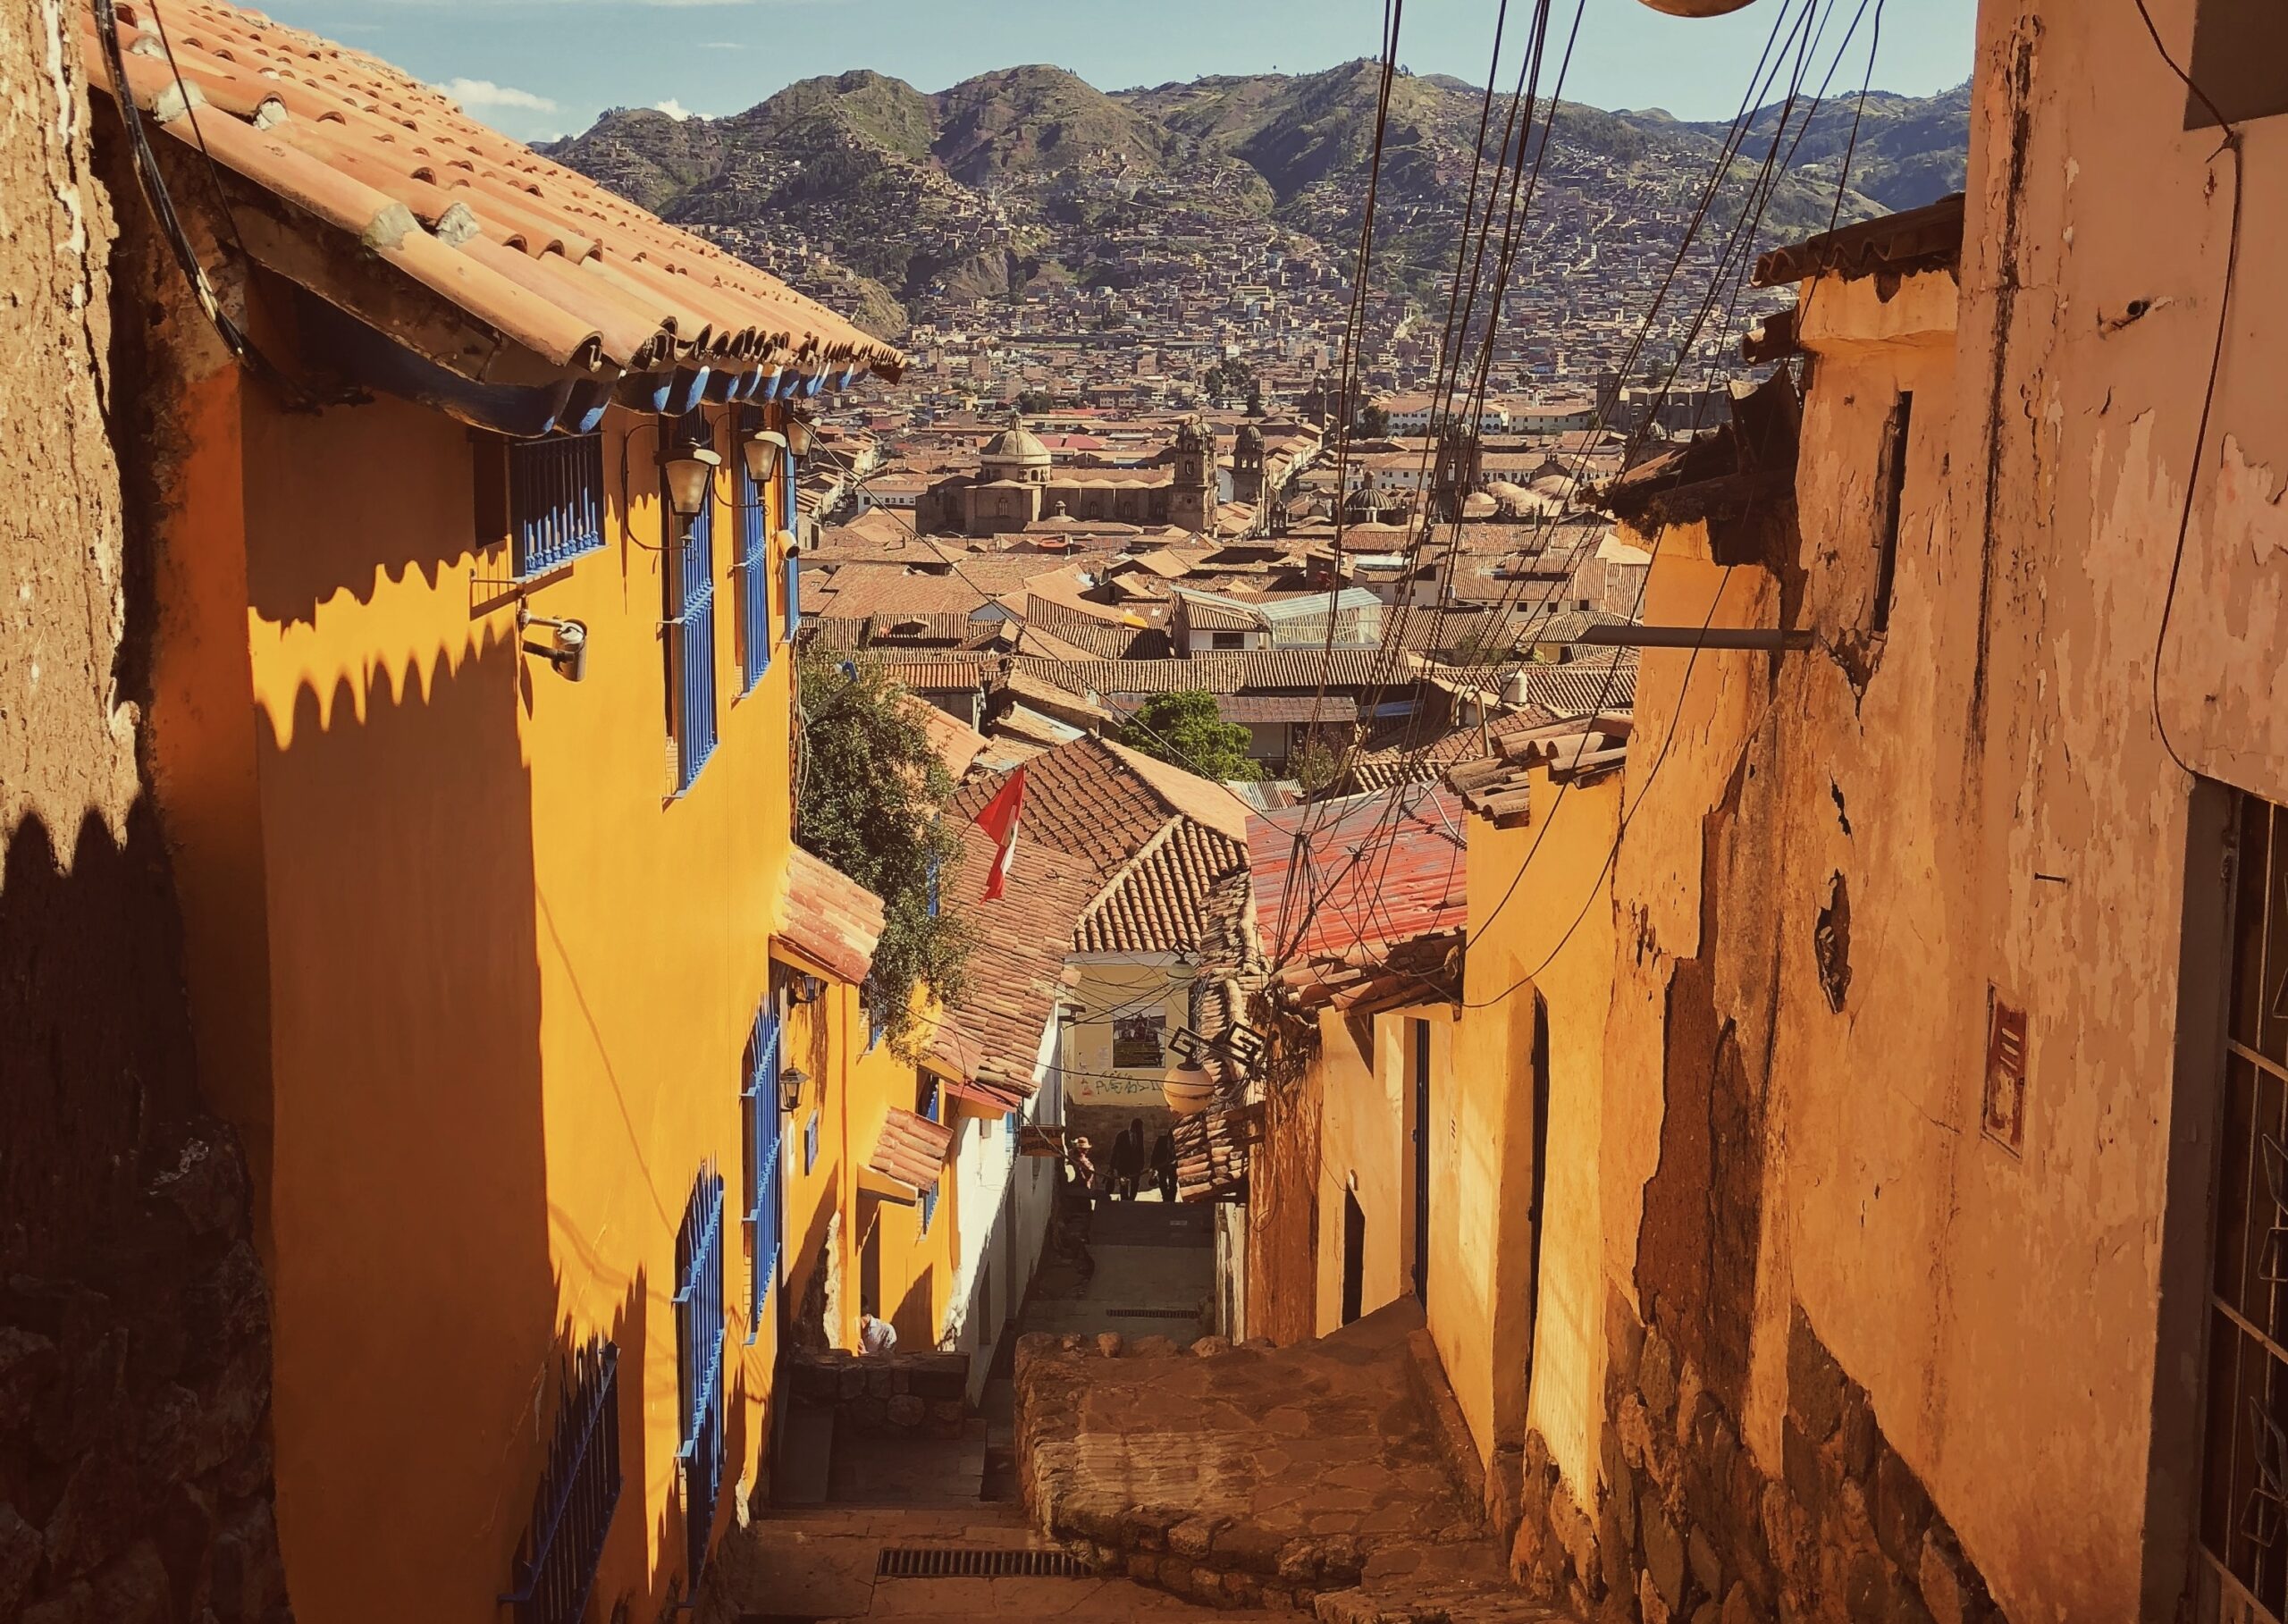 The safety of travelers in Peru is dependent on the area they stay in and information they research. Check out our top travel advisories for Peru. 
Pictured: Cusco, Peru with winding alleys and towering mountains 